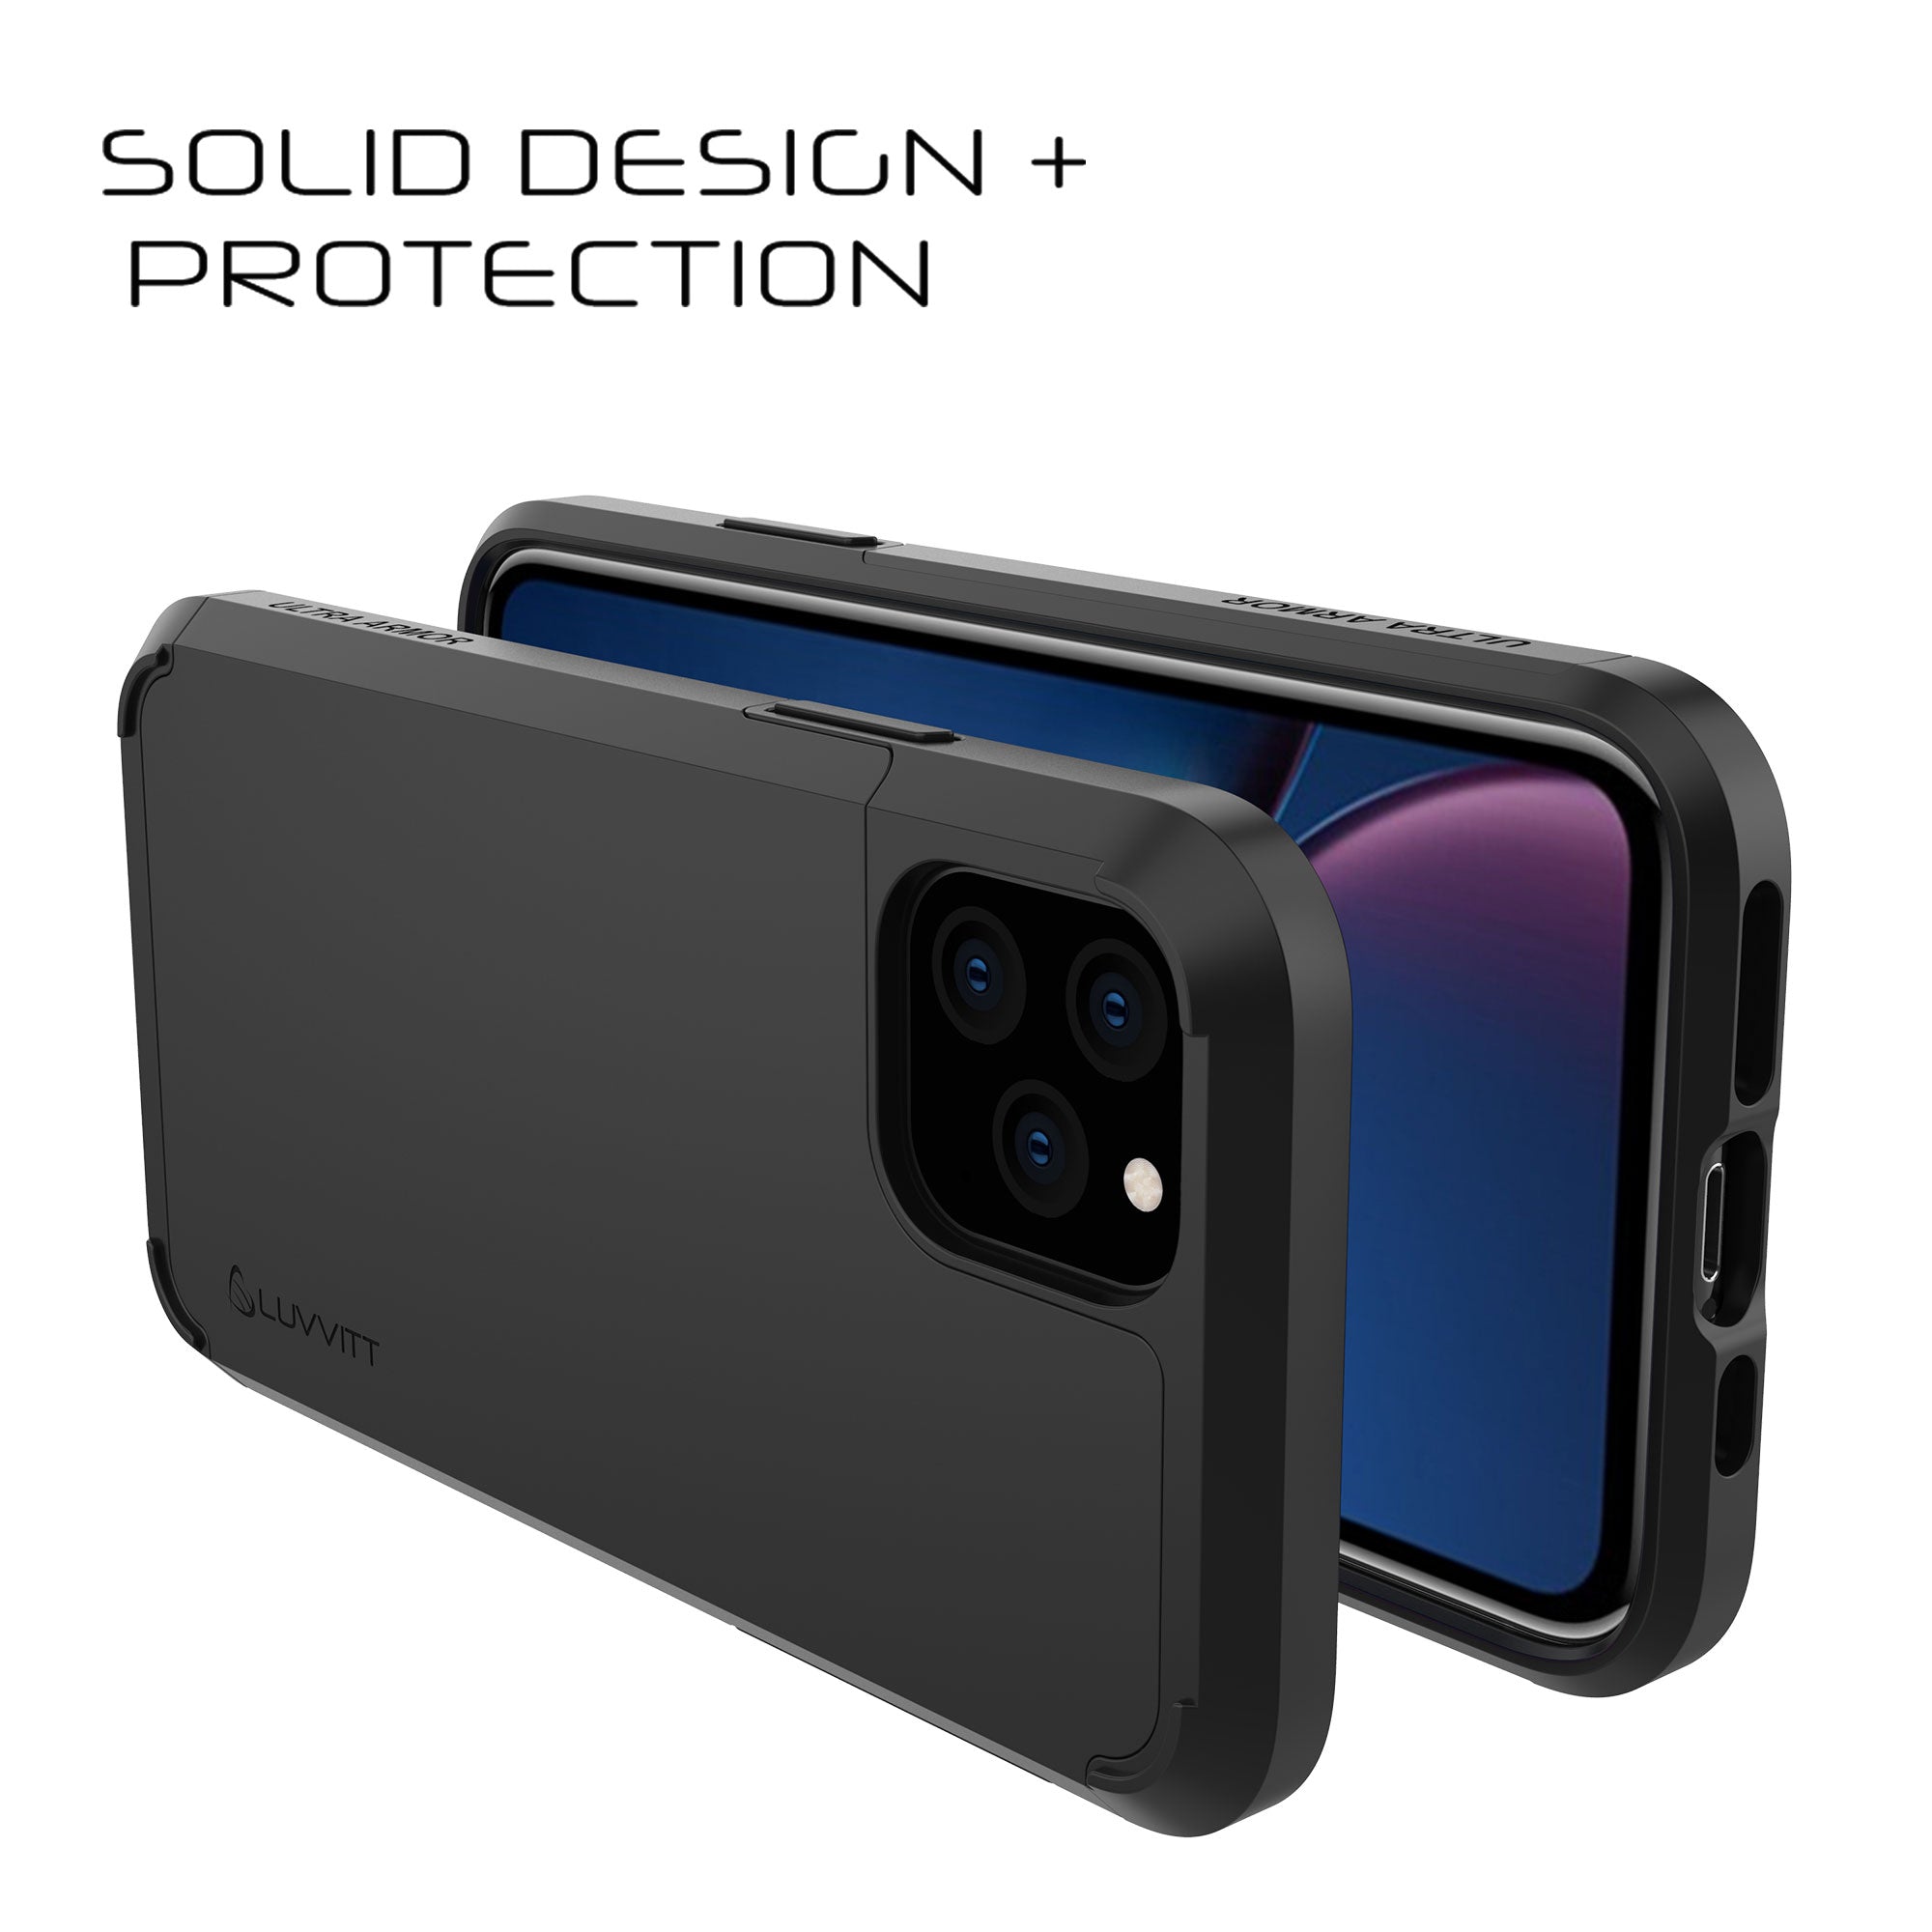 Luvvitt Ultra Armor Case and Liquid Glass Screen Protector Bundle for iPhone 11 Pro Max 2019 - Black